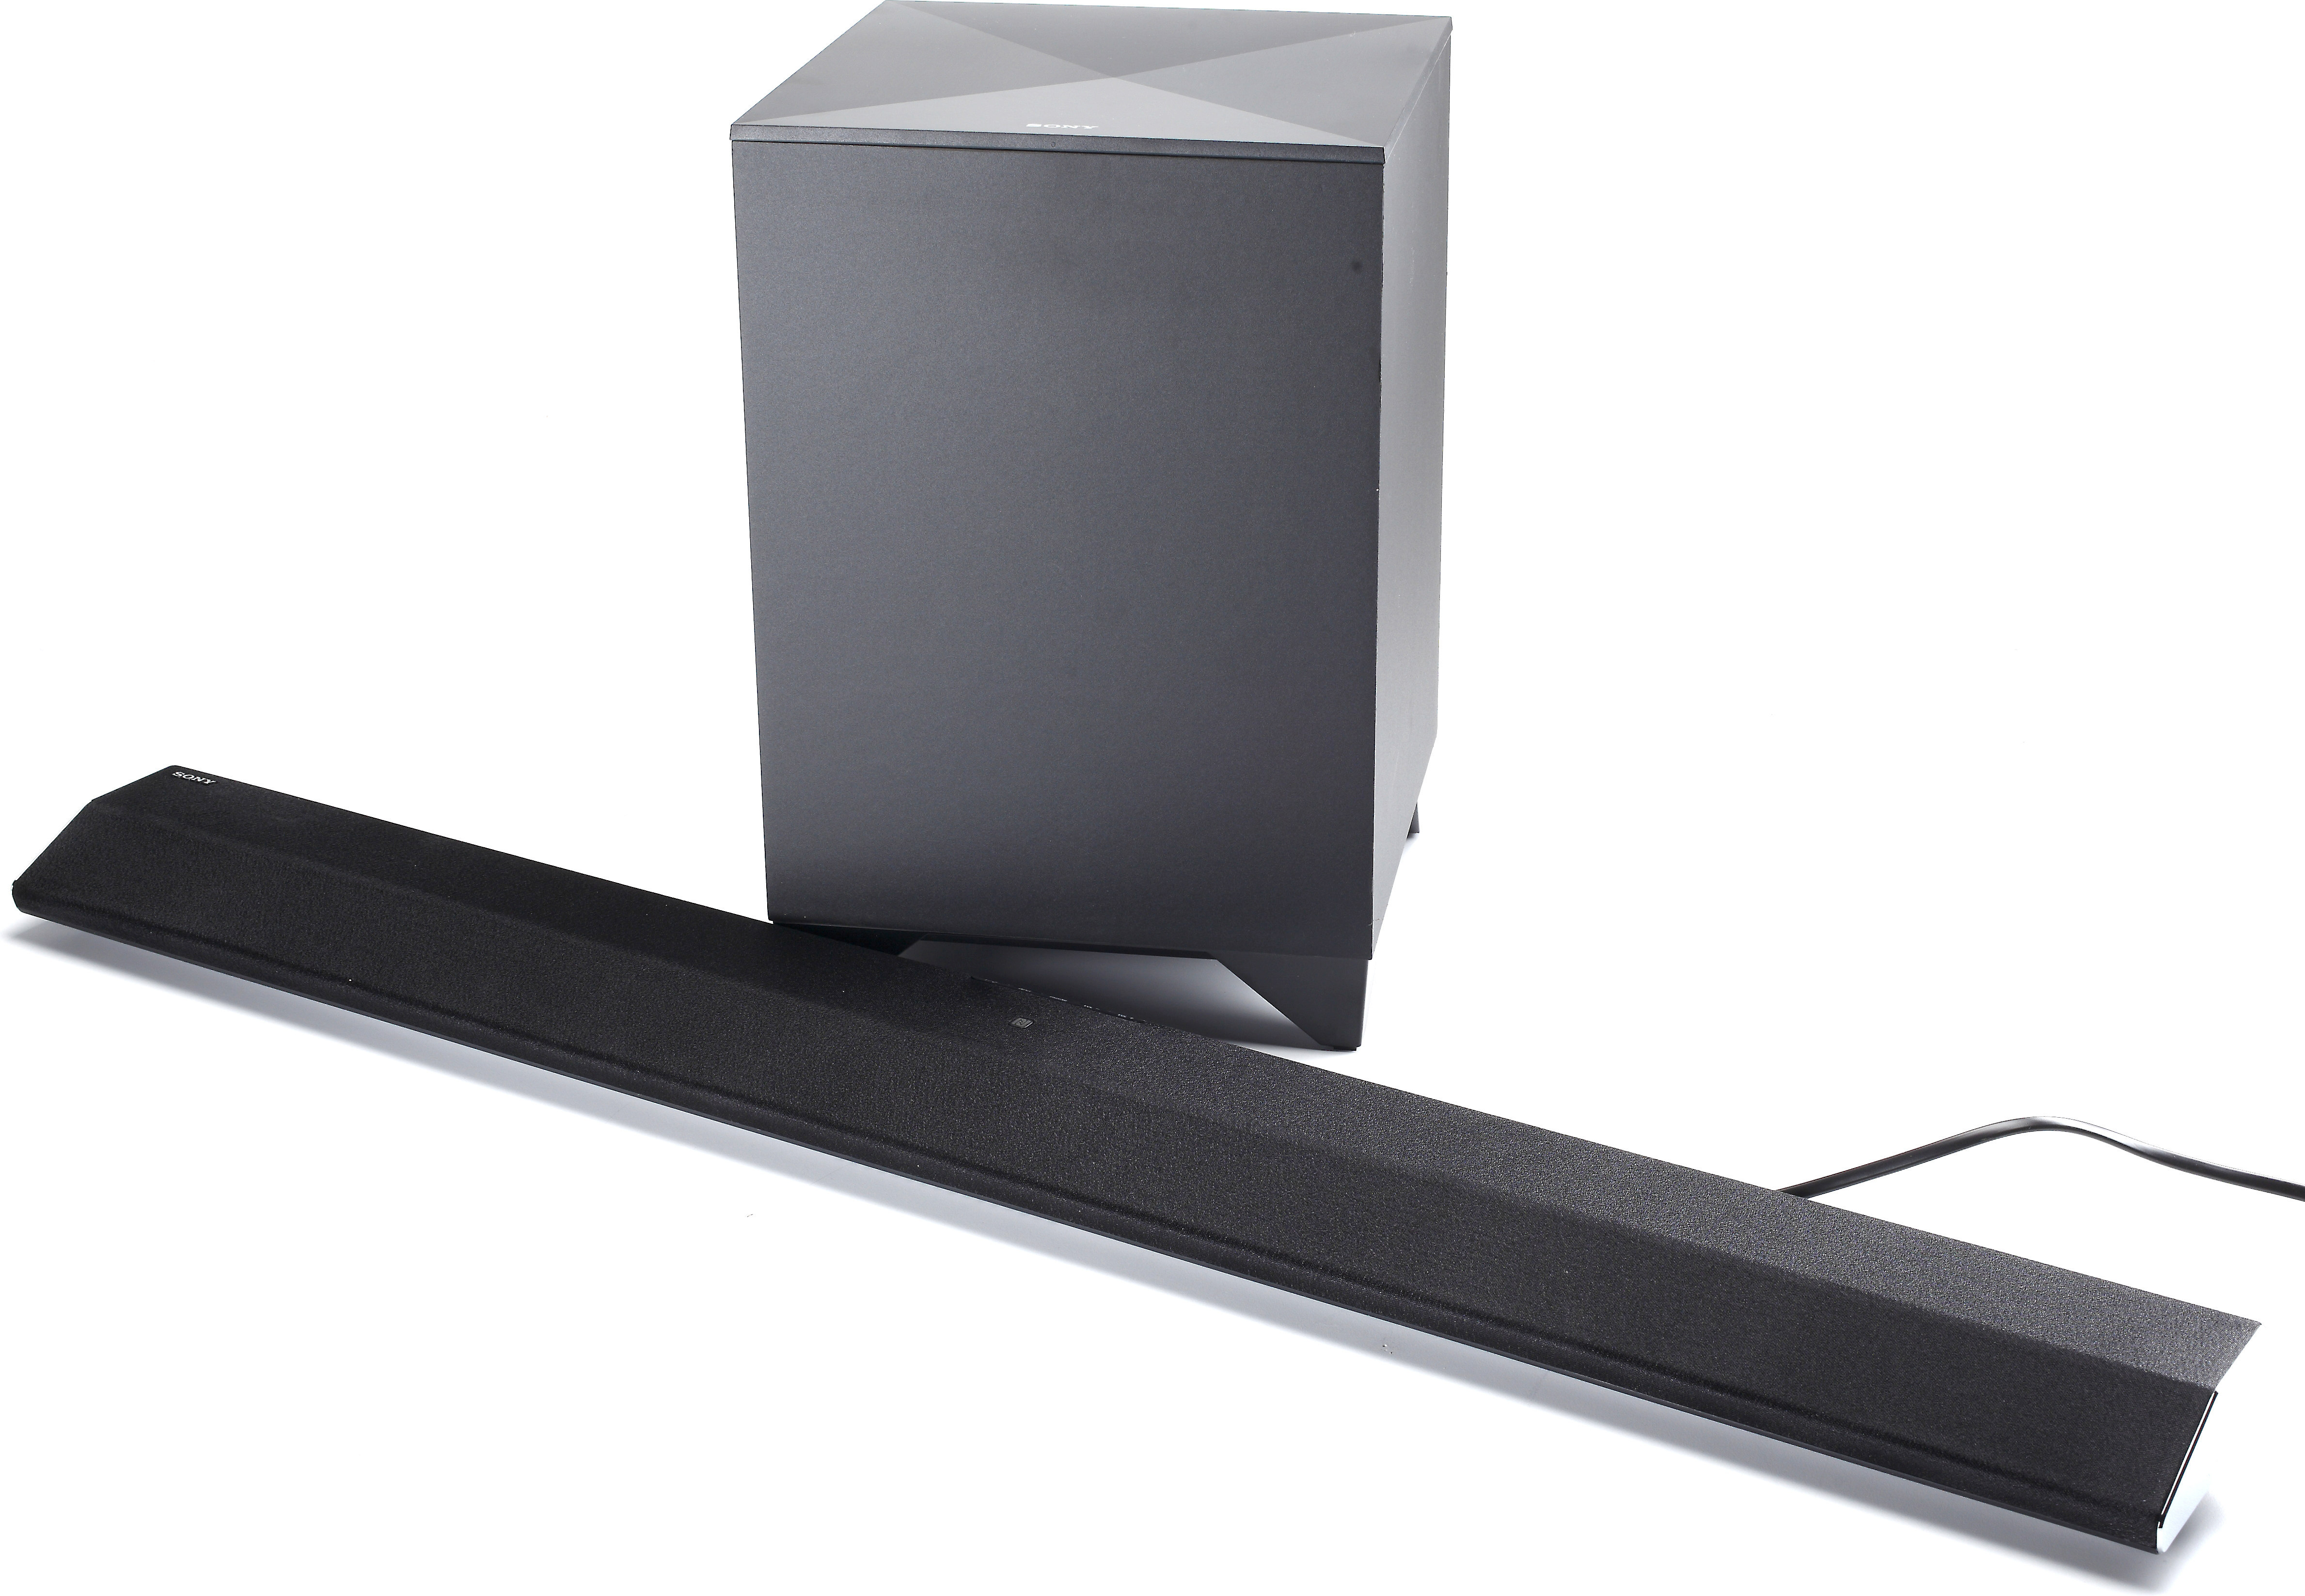 Sony HT-CT770 Powered home theater 